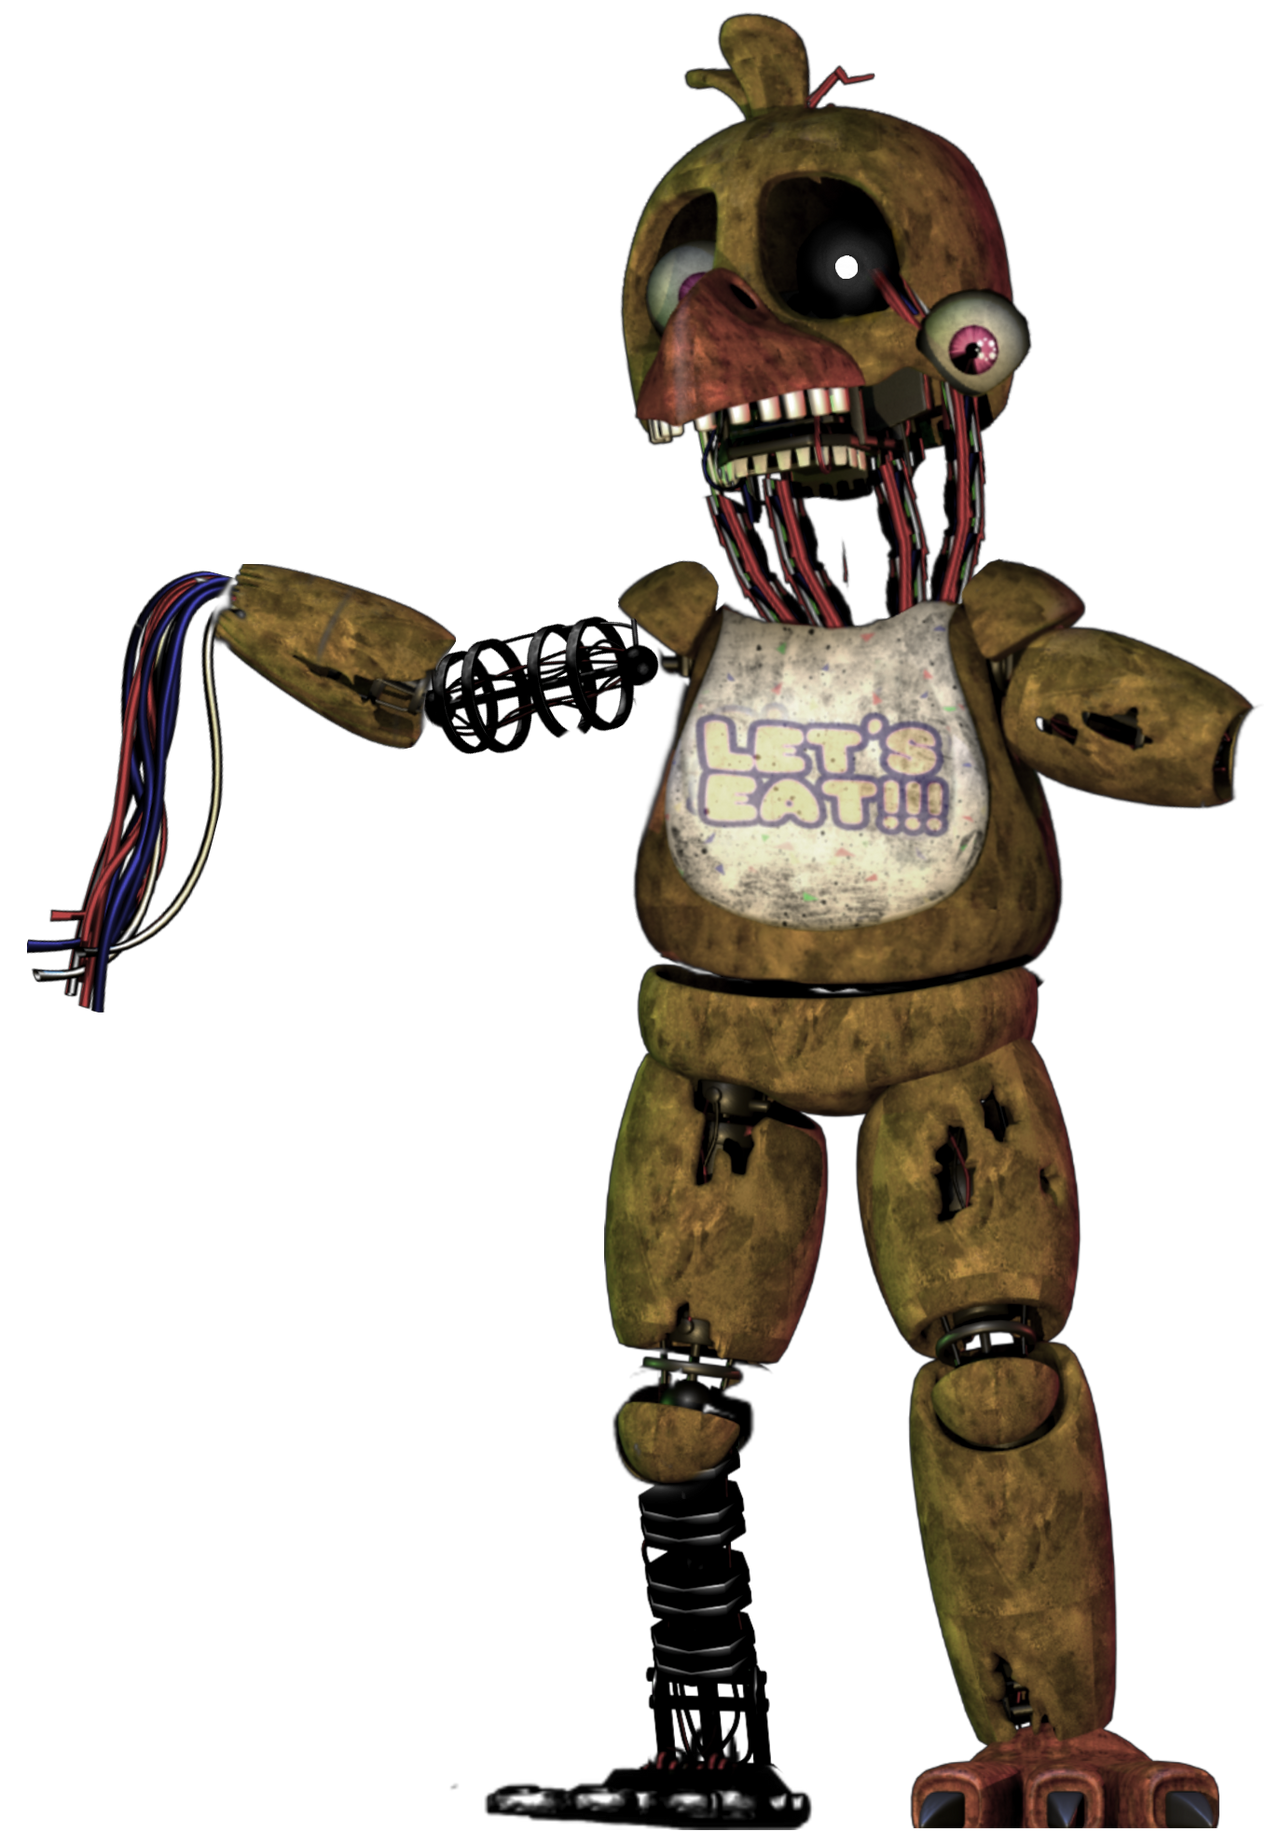 Withered Chica vent icon by Fnaf3Dart on DeviantArt